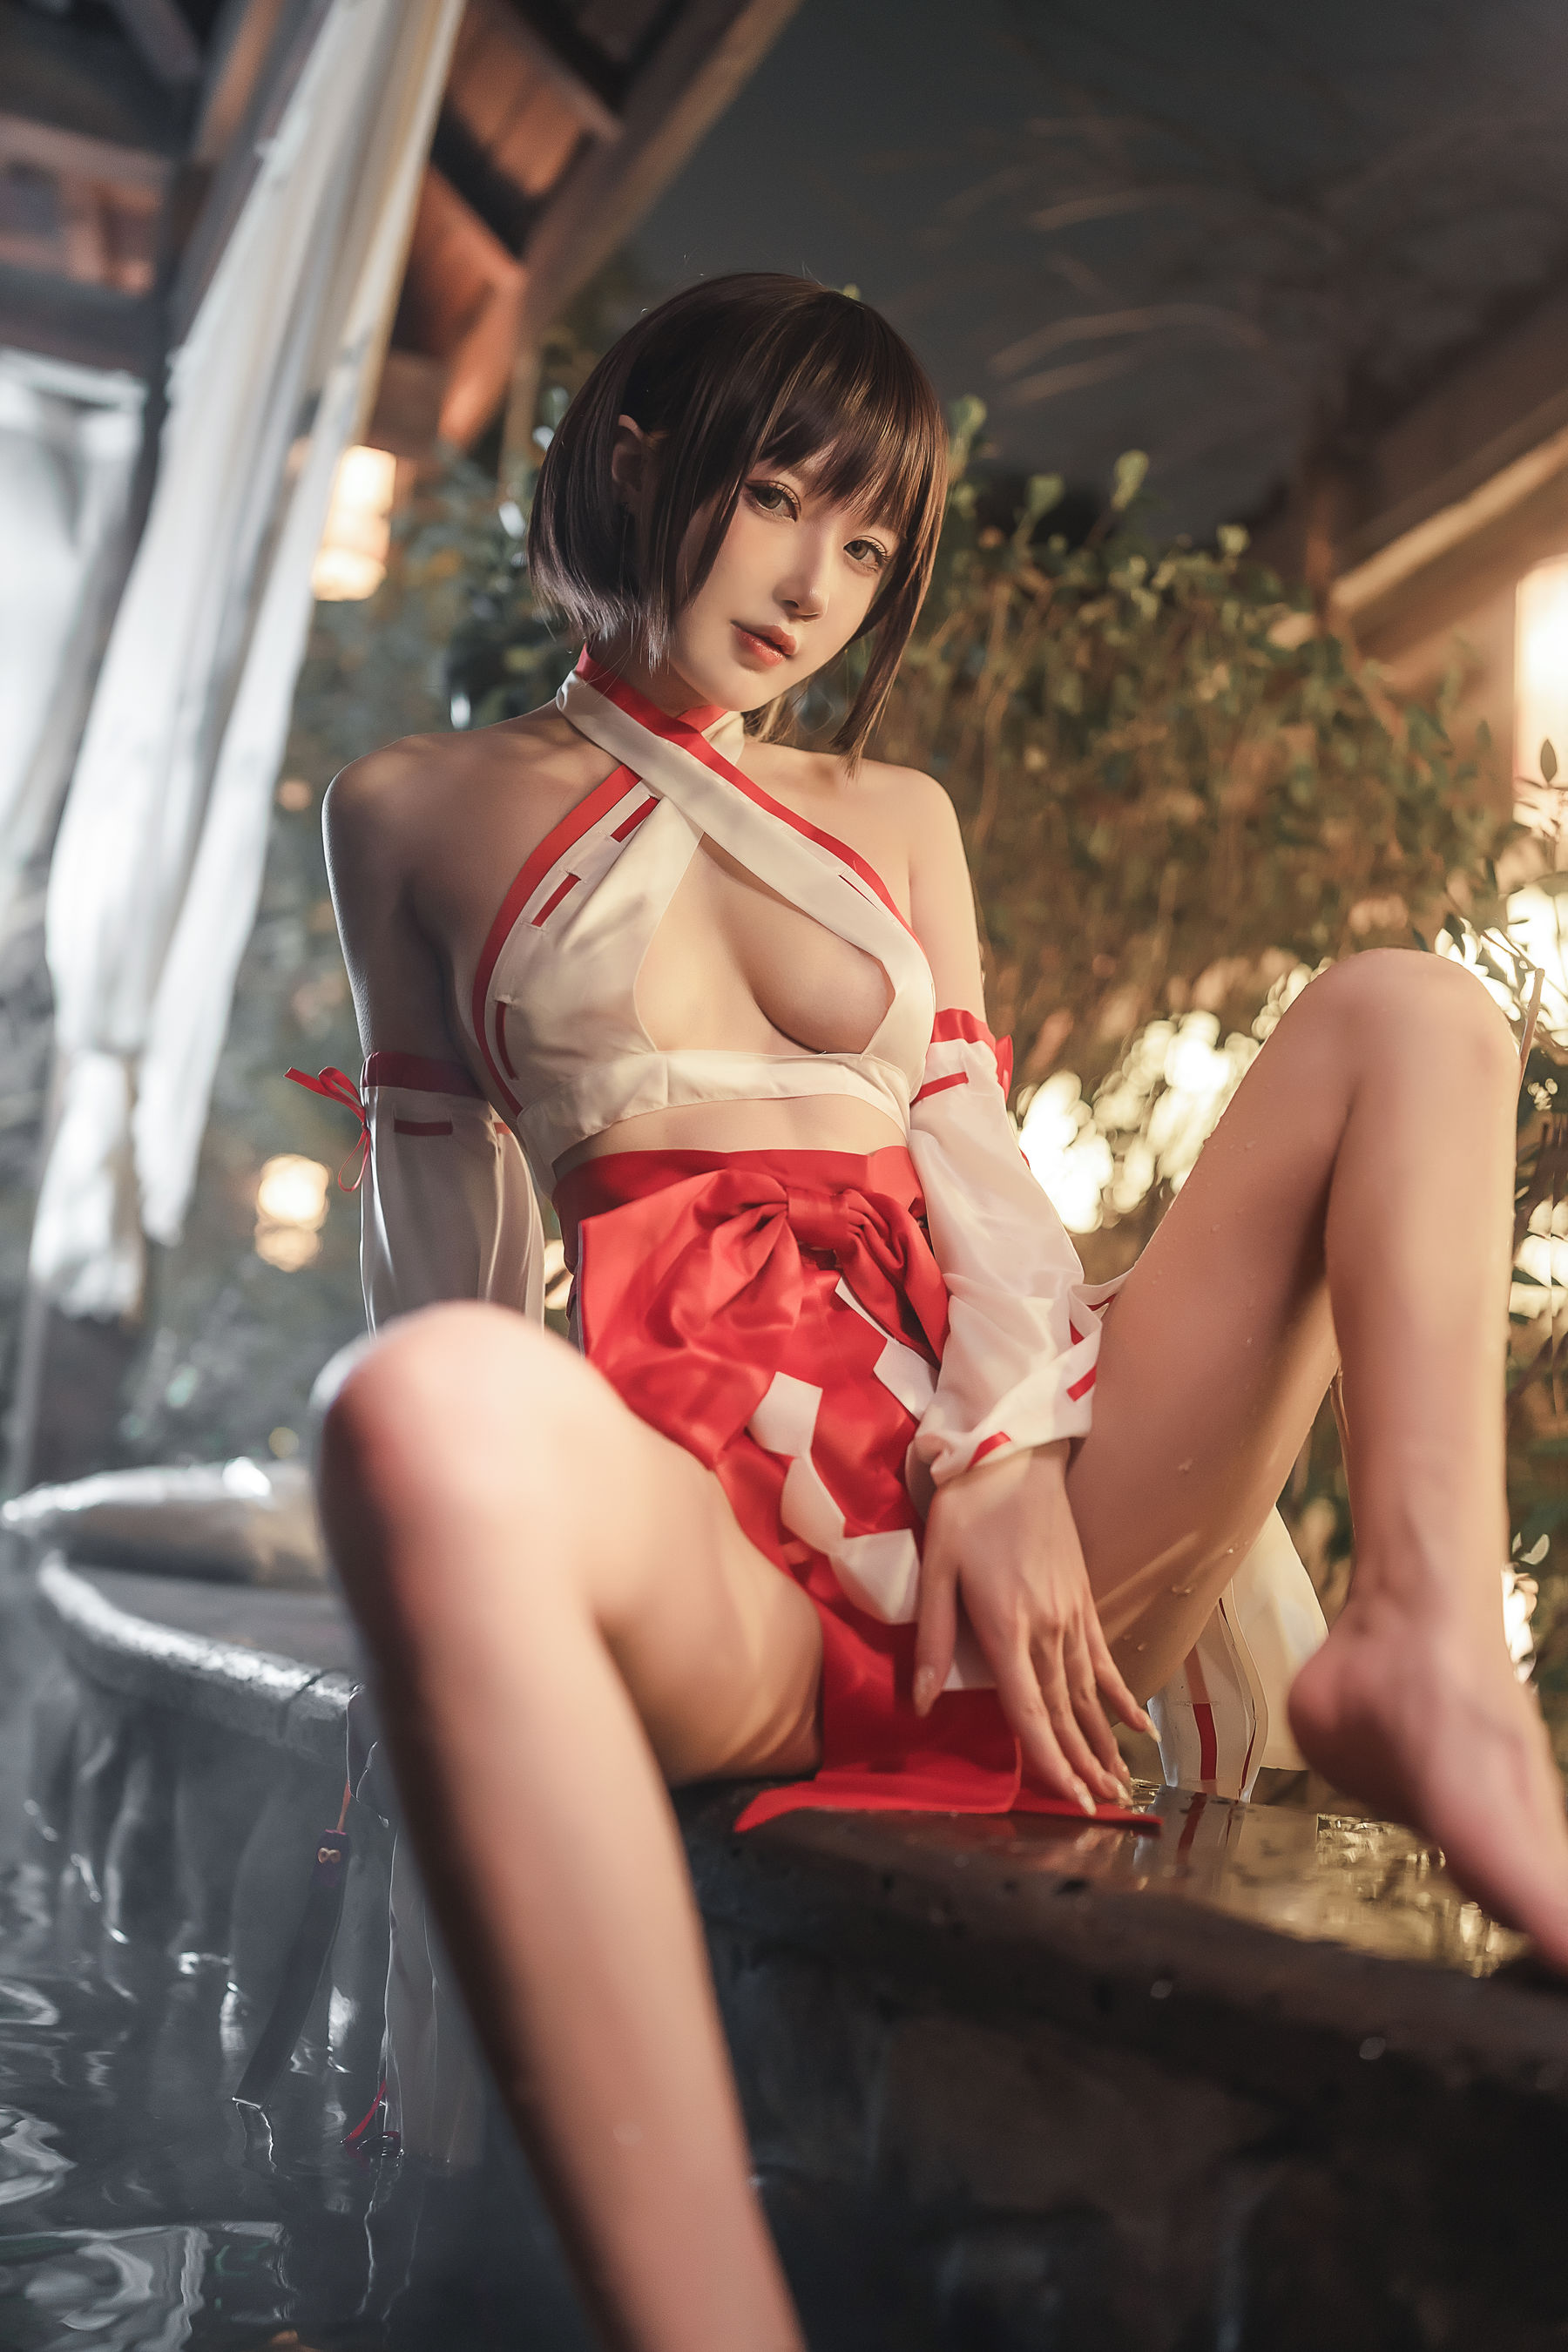 [Net Red COSER Photo] Anime blogger A Bao is also a rabbit girl - Hot Spring Miko Page 8 No.f99427